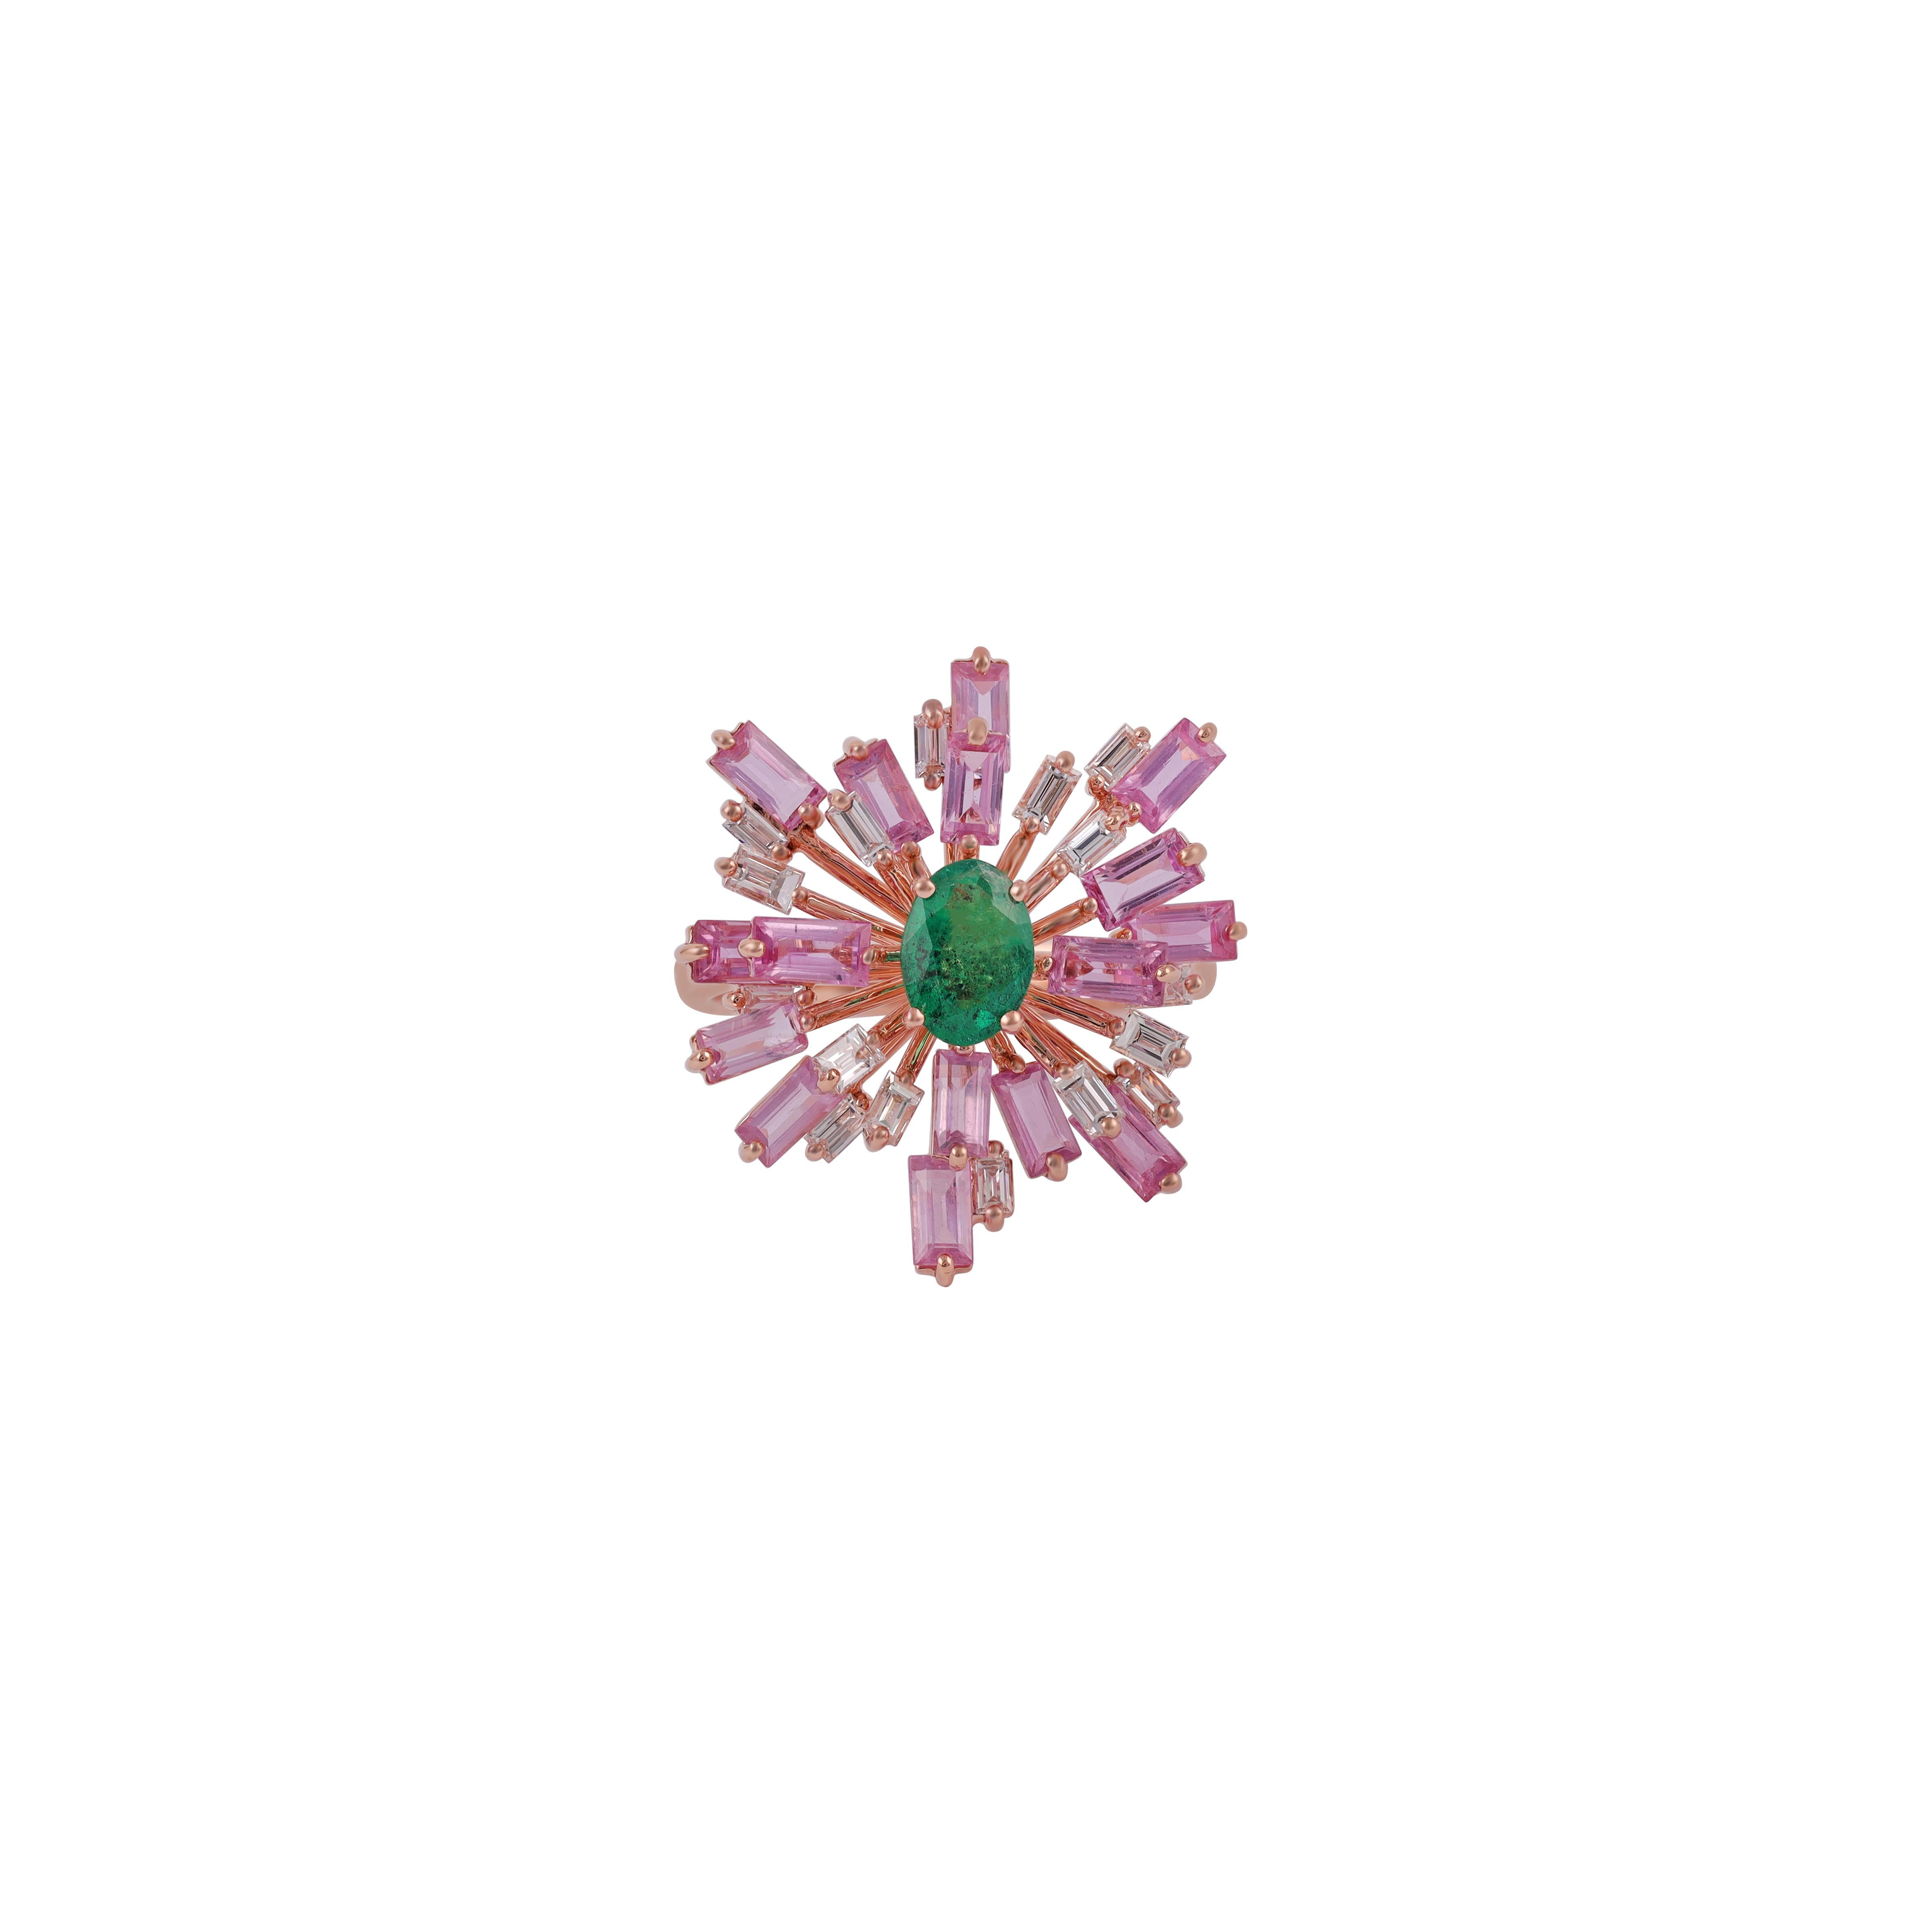 1 Oval shape Emerald with Diamond Ring Studded in 18k Rose Gold
1 Oval shape Emerald in 0.63 CTS
16 Pink Sapphire Baguettes in 2.78 CTS
16 Diamond Baguettes in 0.52 CTS
18 K Rose Gold in 5.2 GMS

Custom Services
Resizing is available.
Request